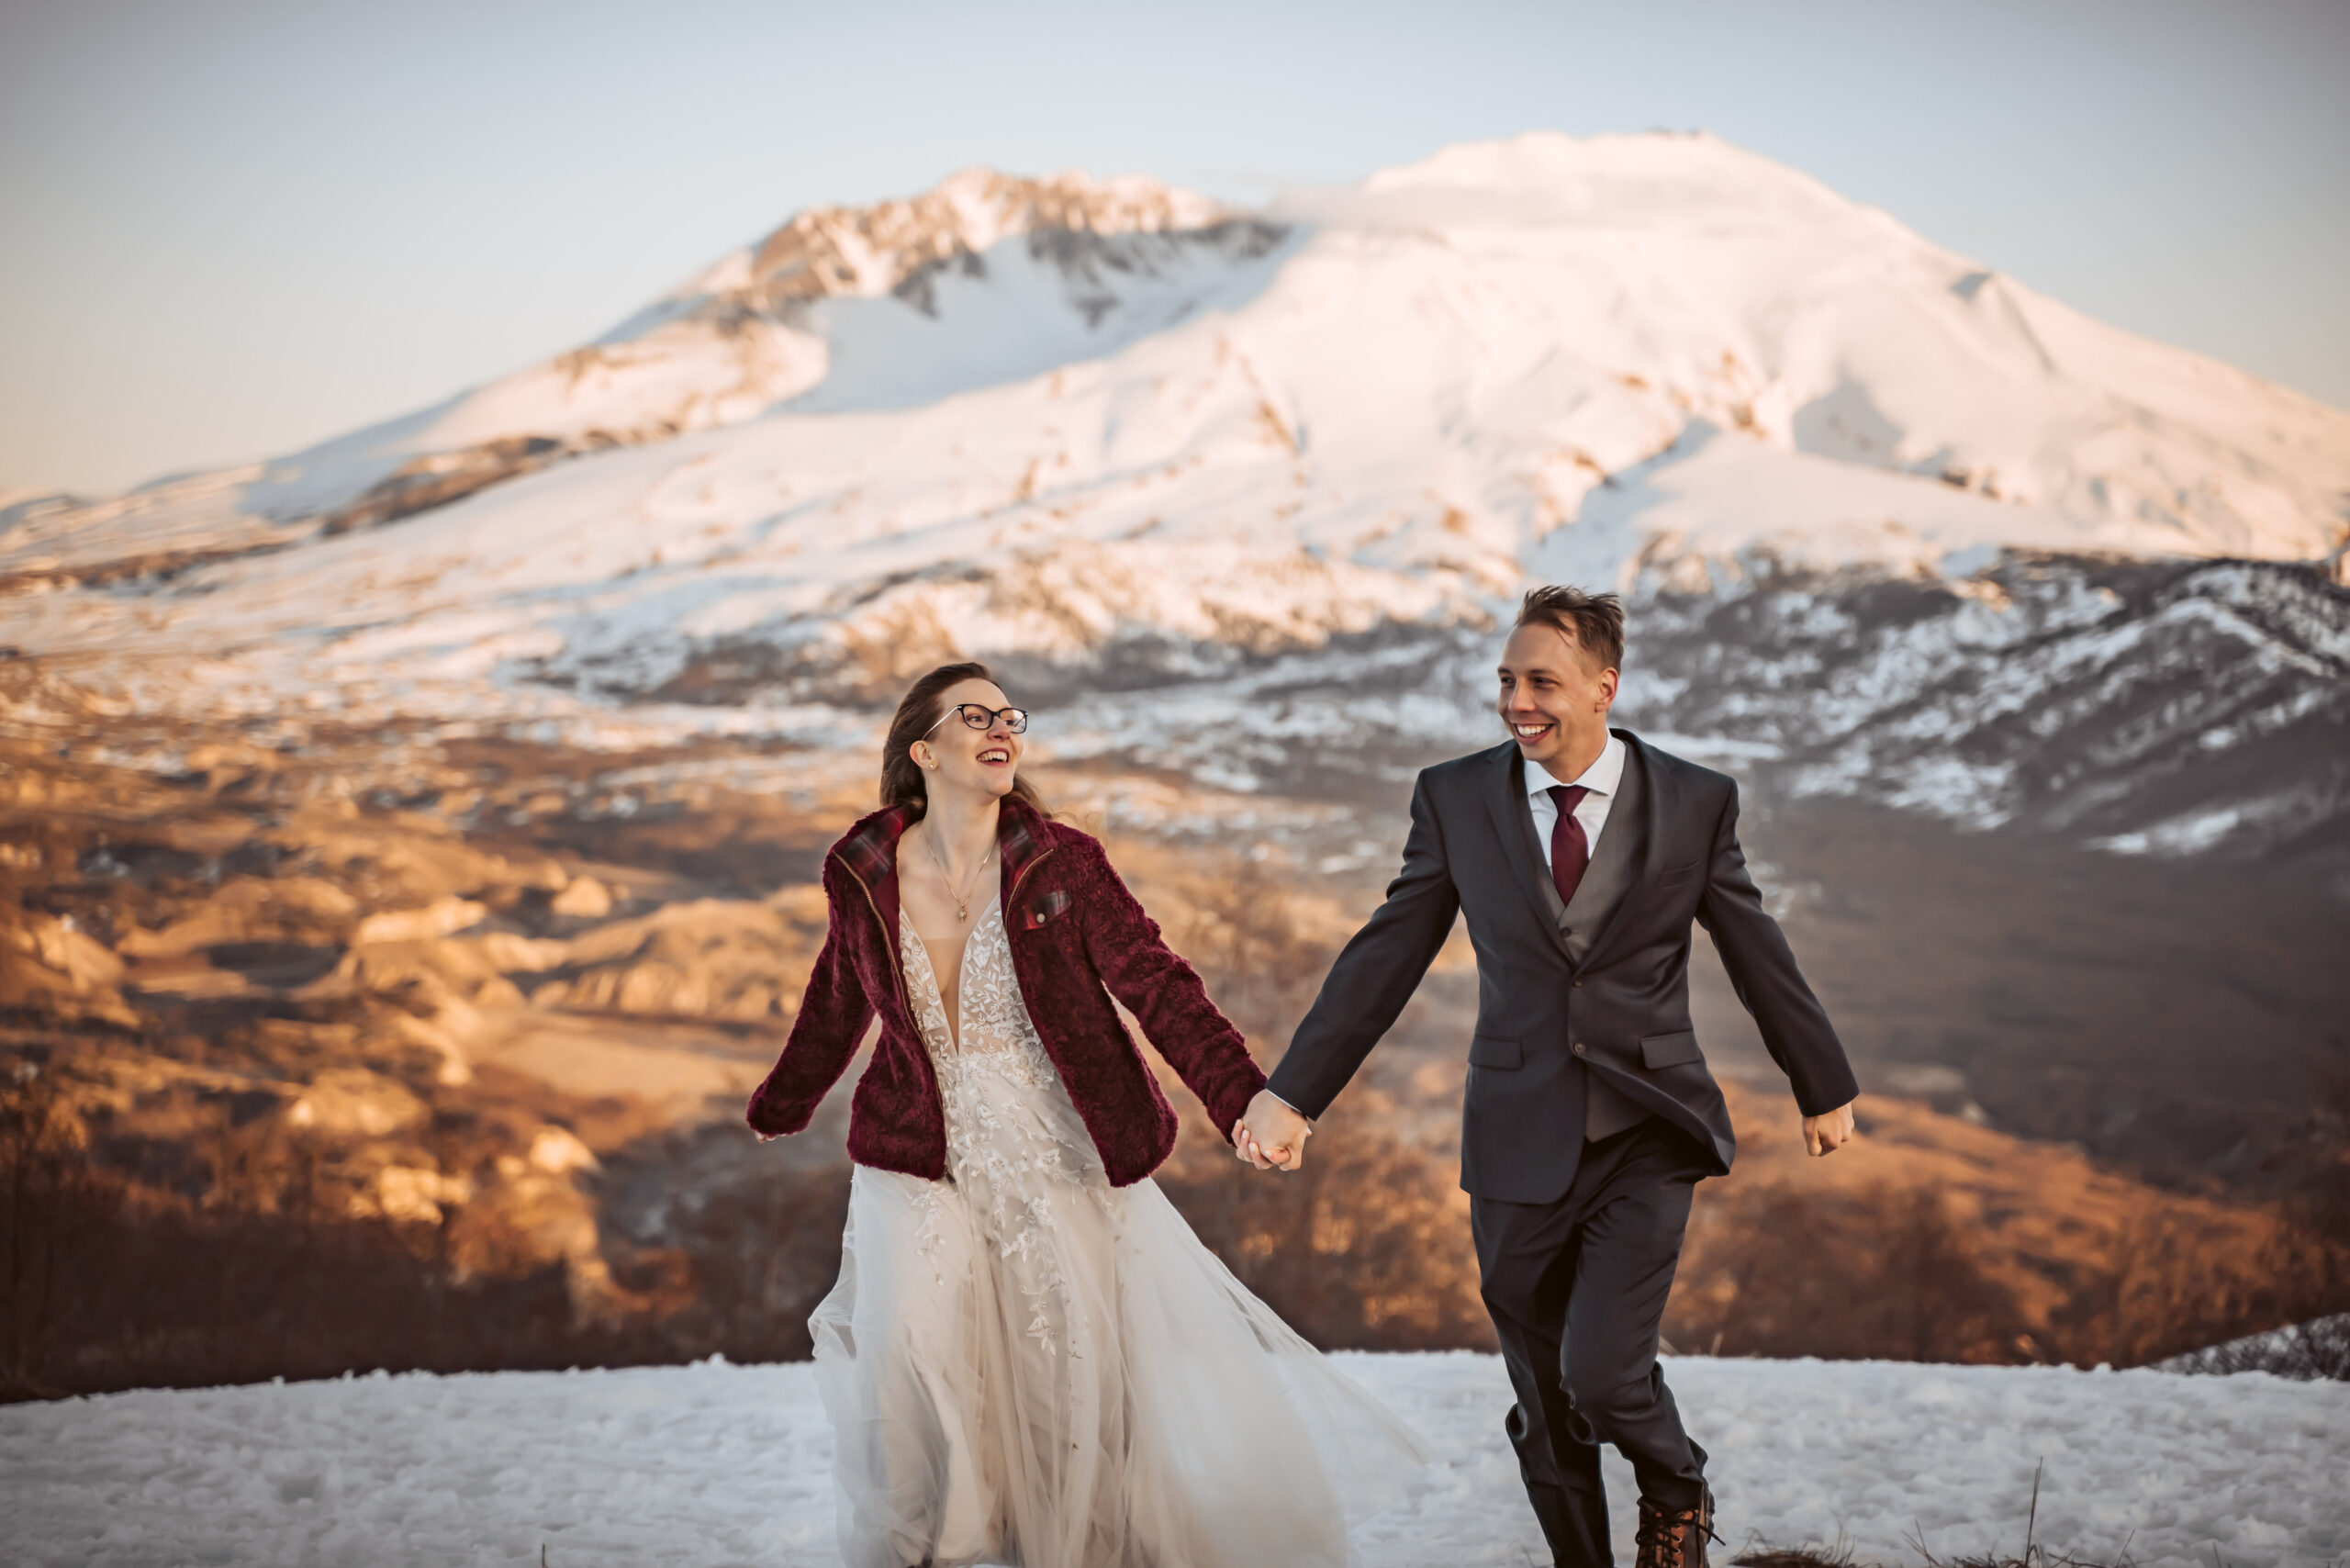  a recently married couple running in the snow with Mount Saint Helen's in the background